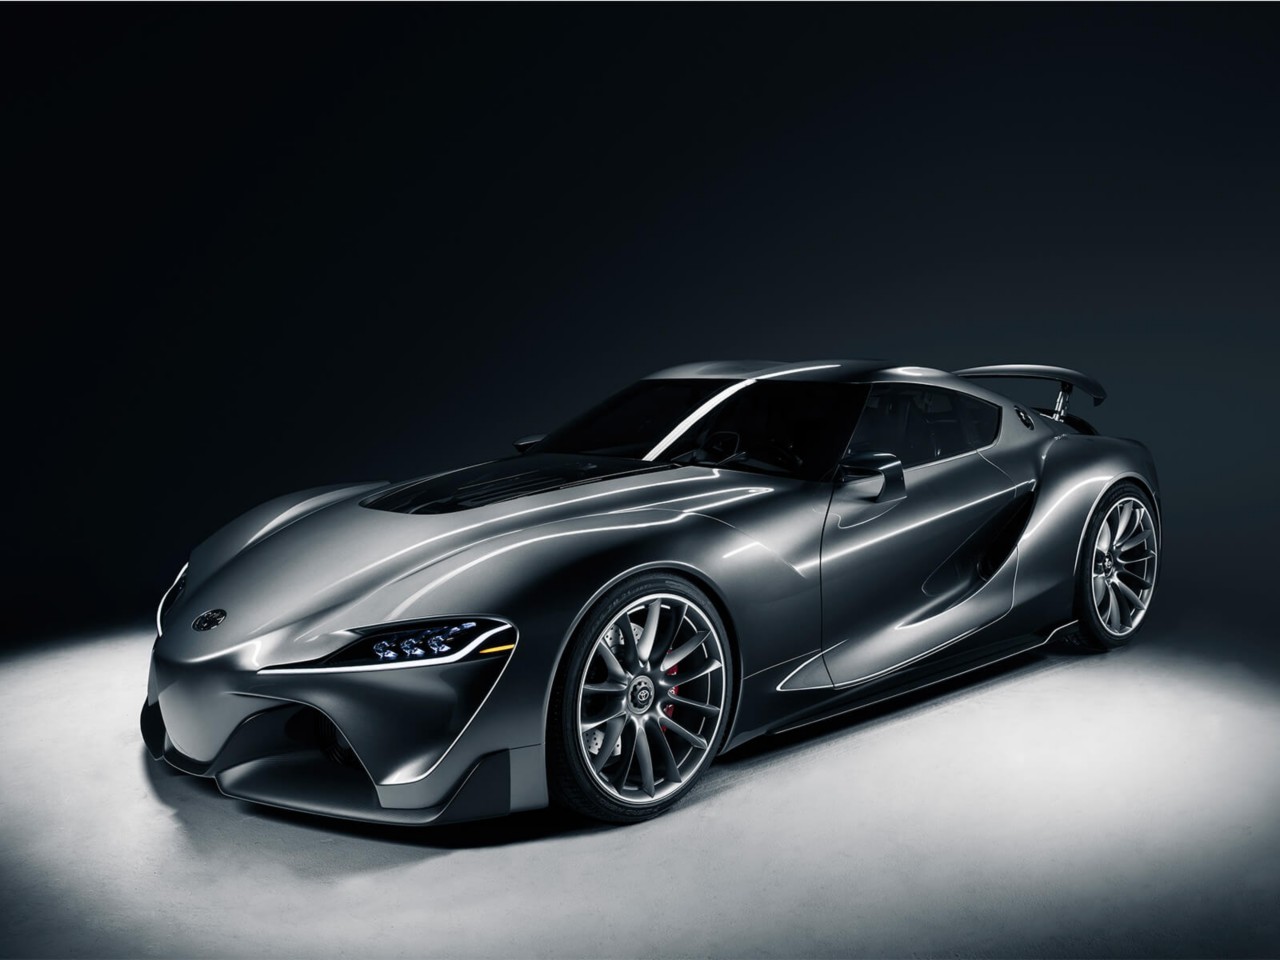 Toyota FT-1 car in shadow